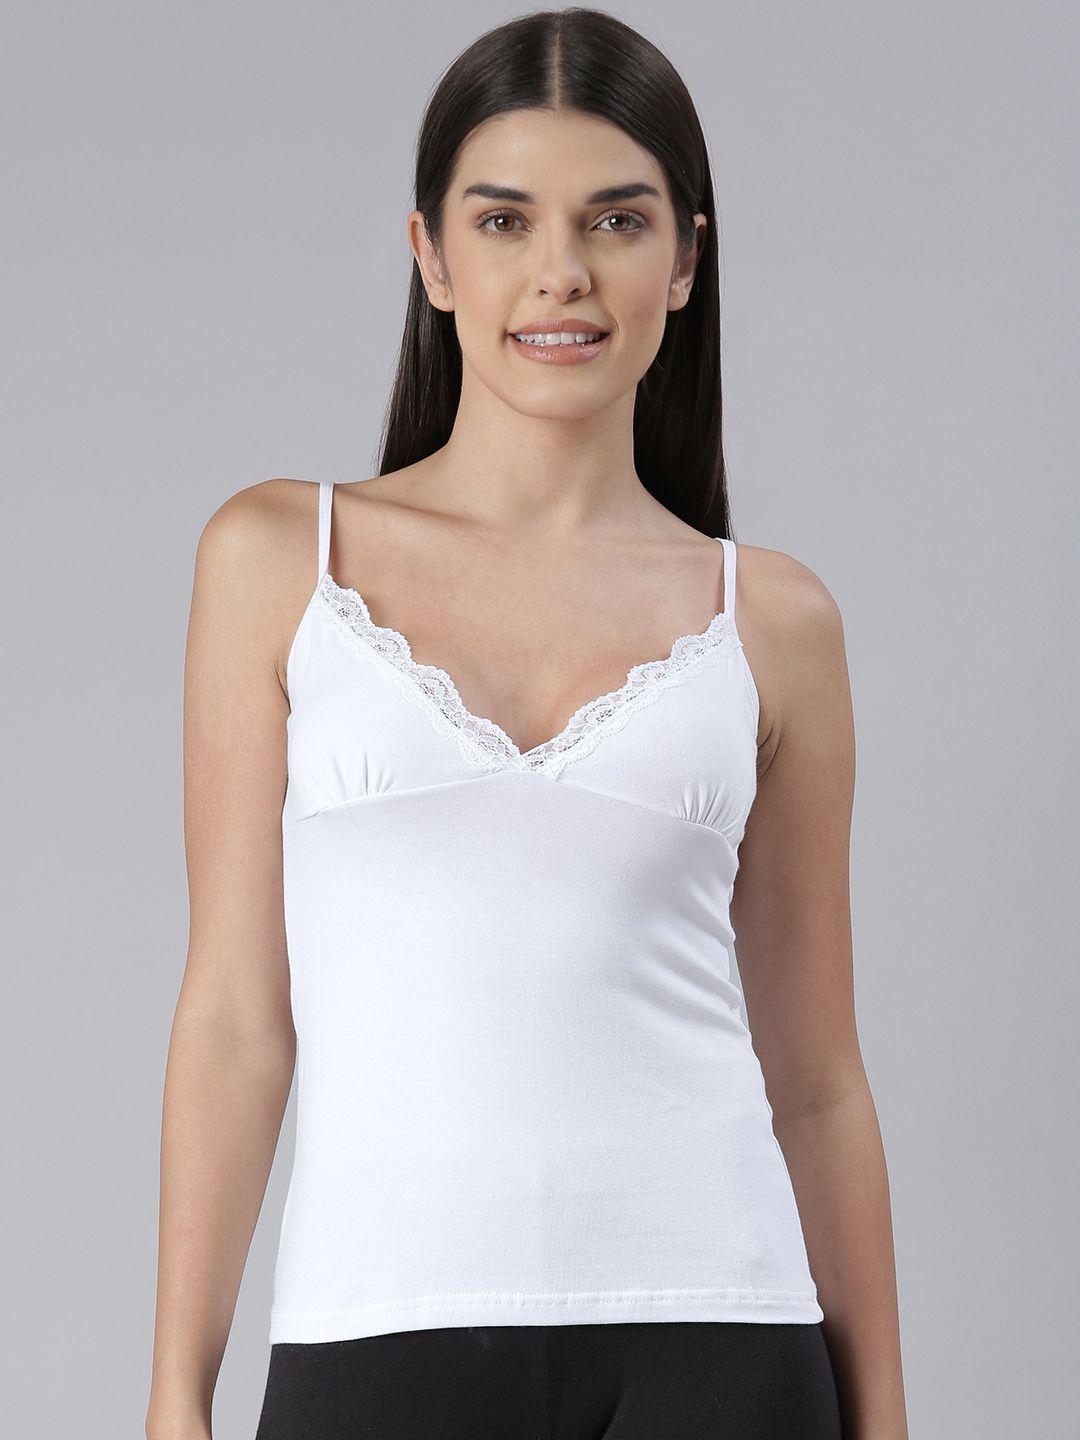 miorre women modal camisole with lace inserts